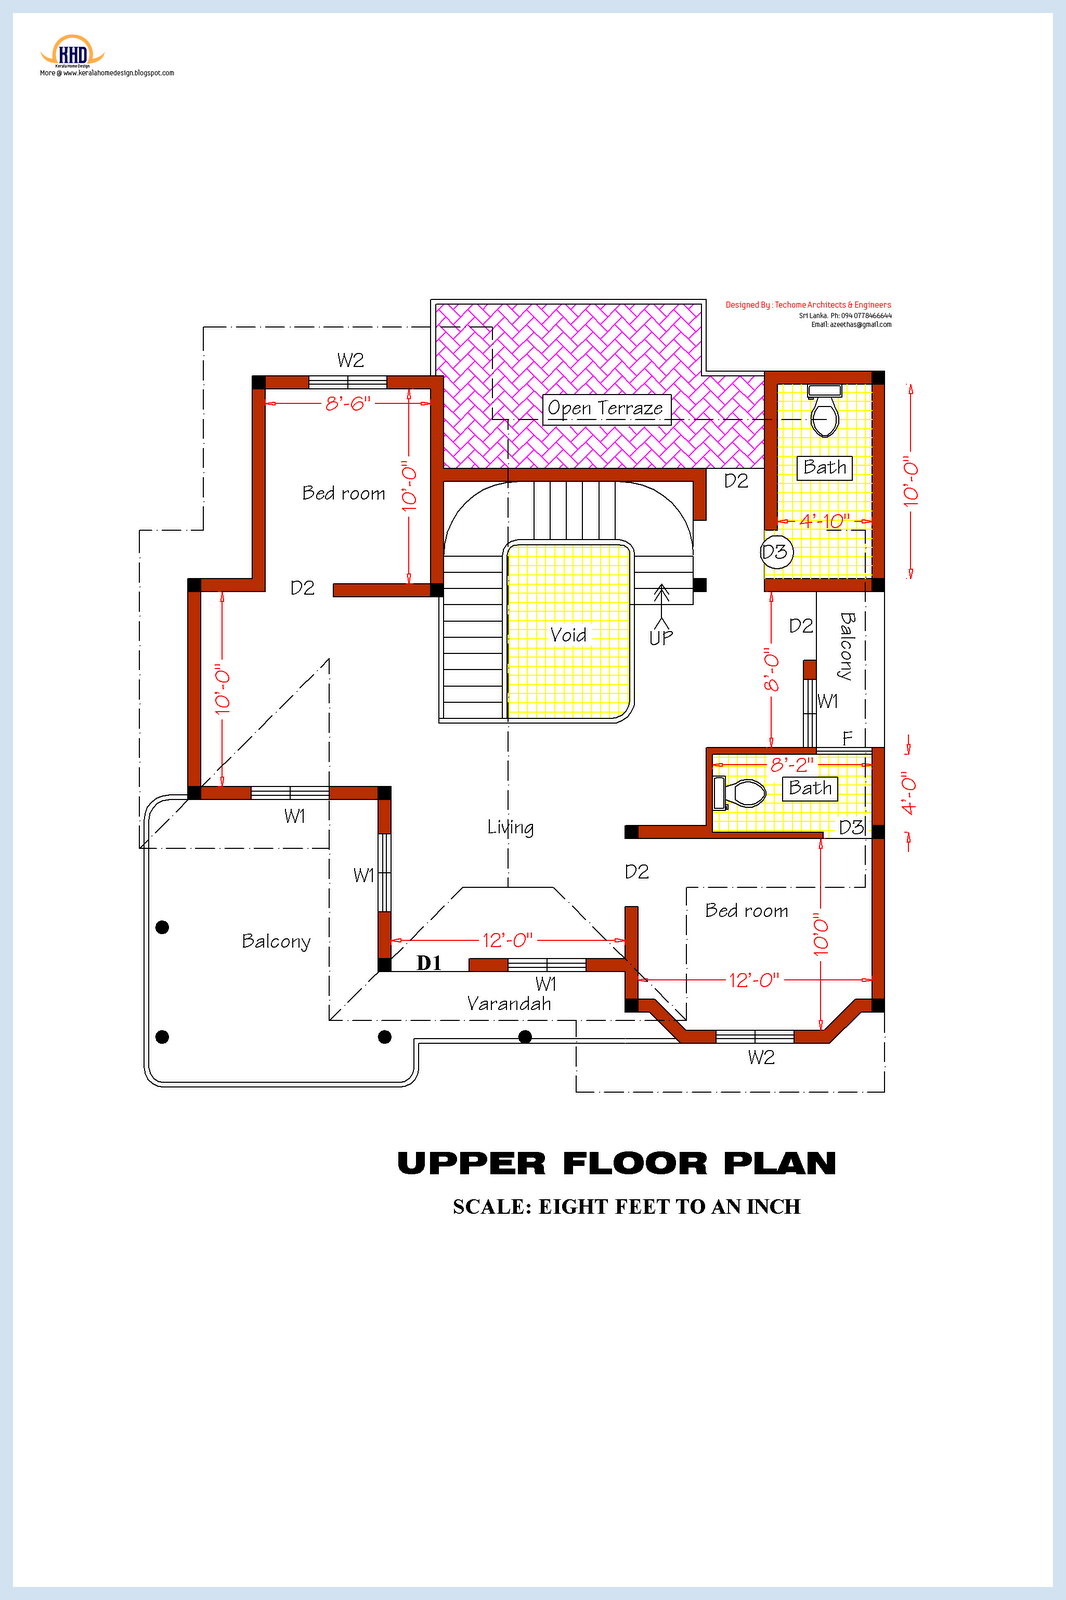 3 Bedroom home  plan  and elevation Kerala home  design  and 